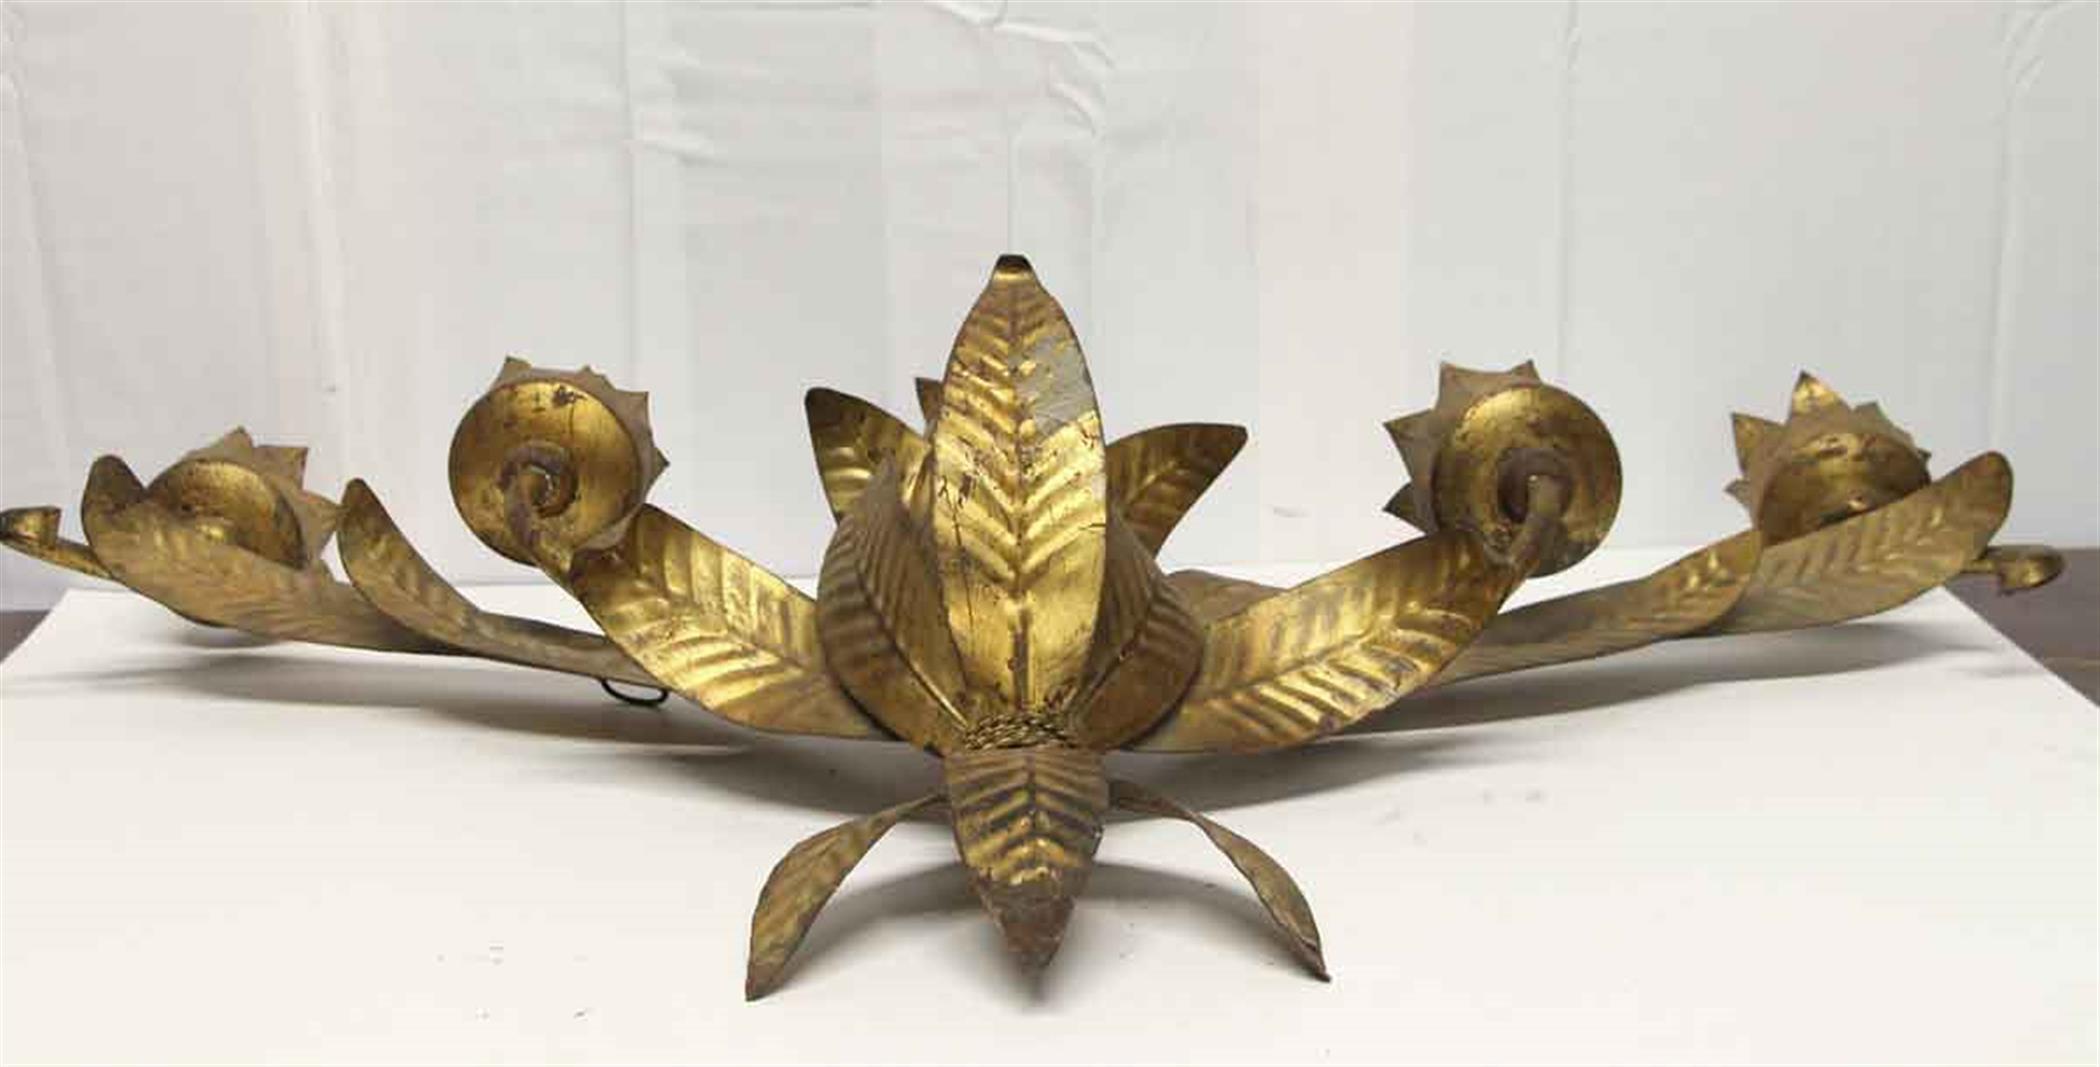 Contemporary Single Hand Hammered Five Light Floral Steel Candle Wall Sconce with Gold Finish